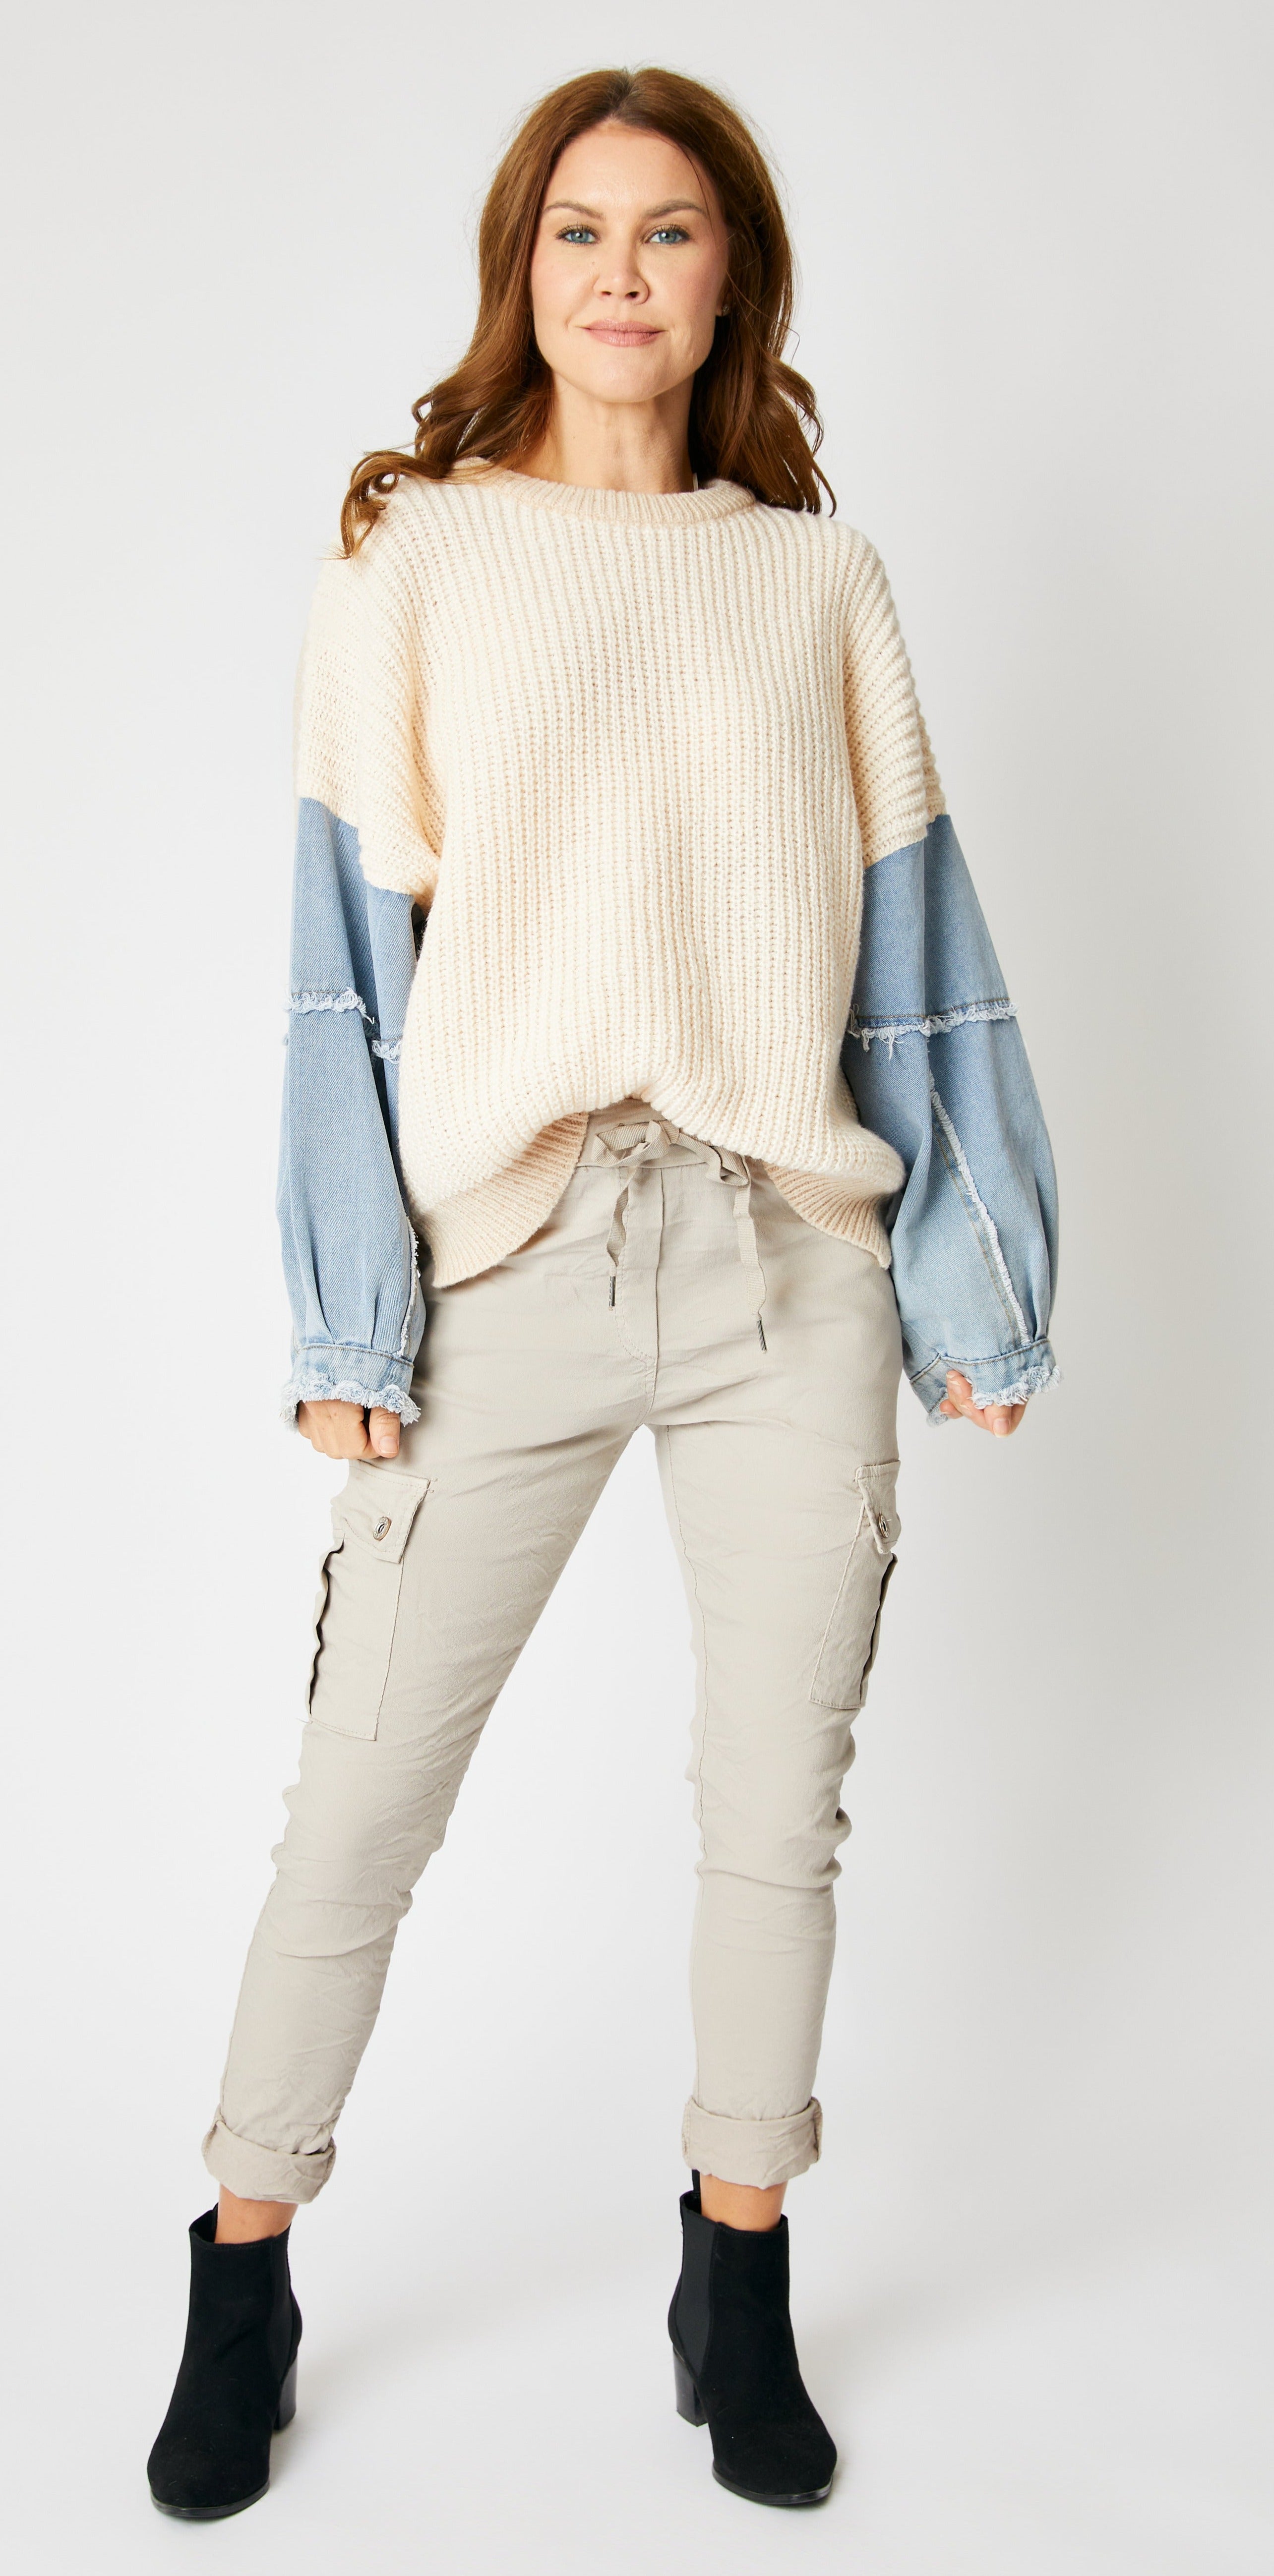 Knit Sweater with Denim Sleeves